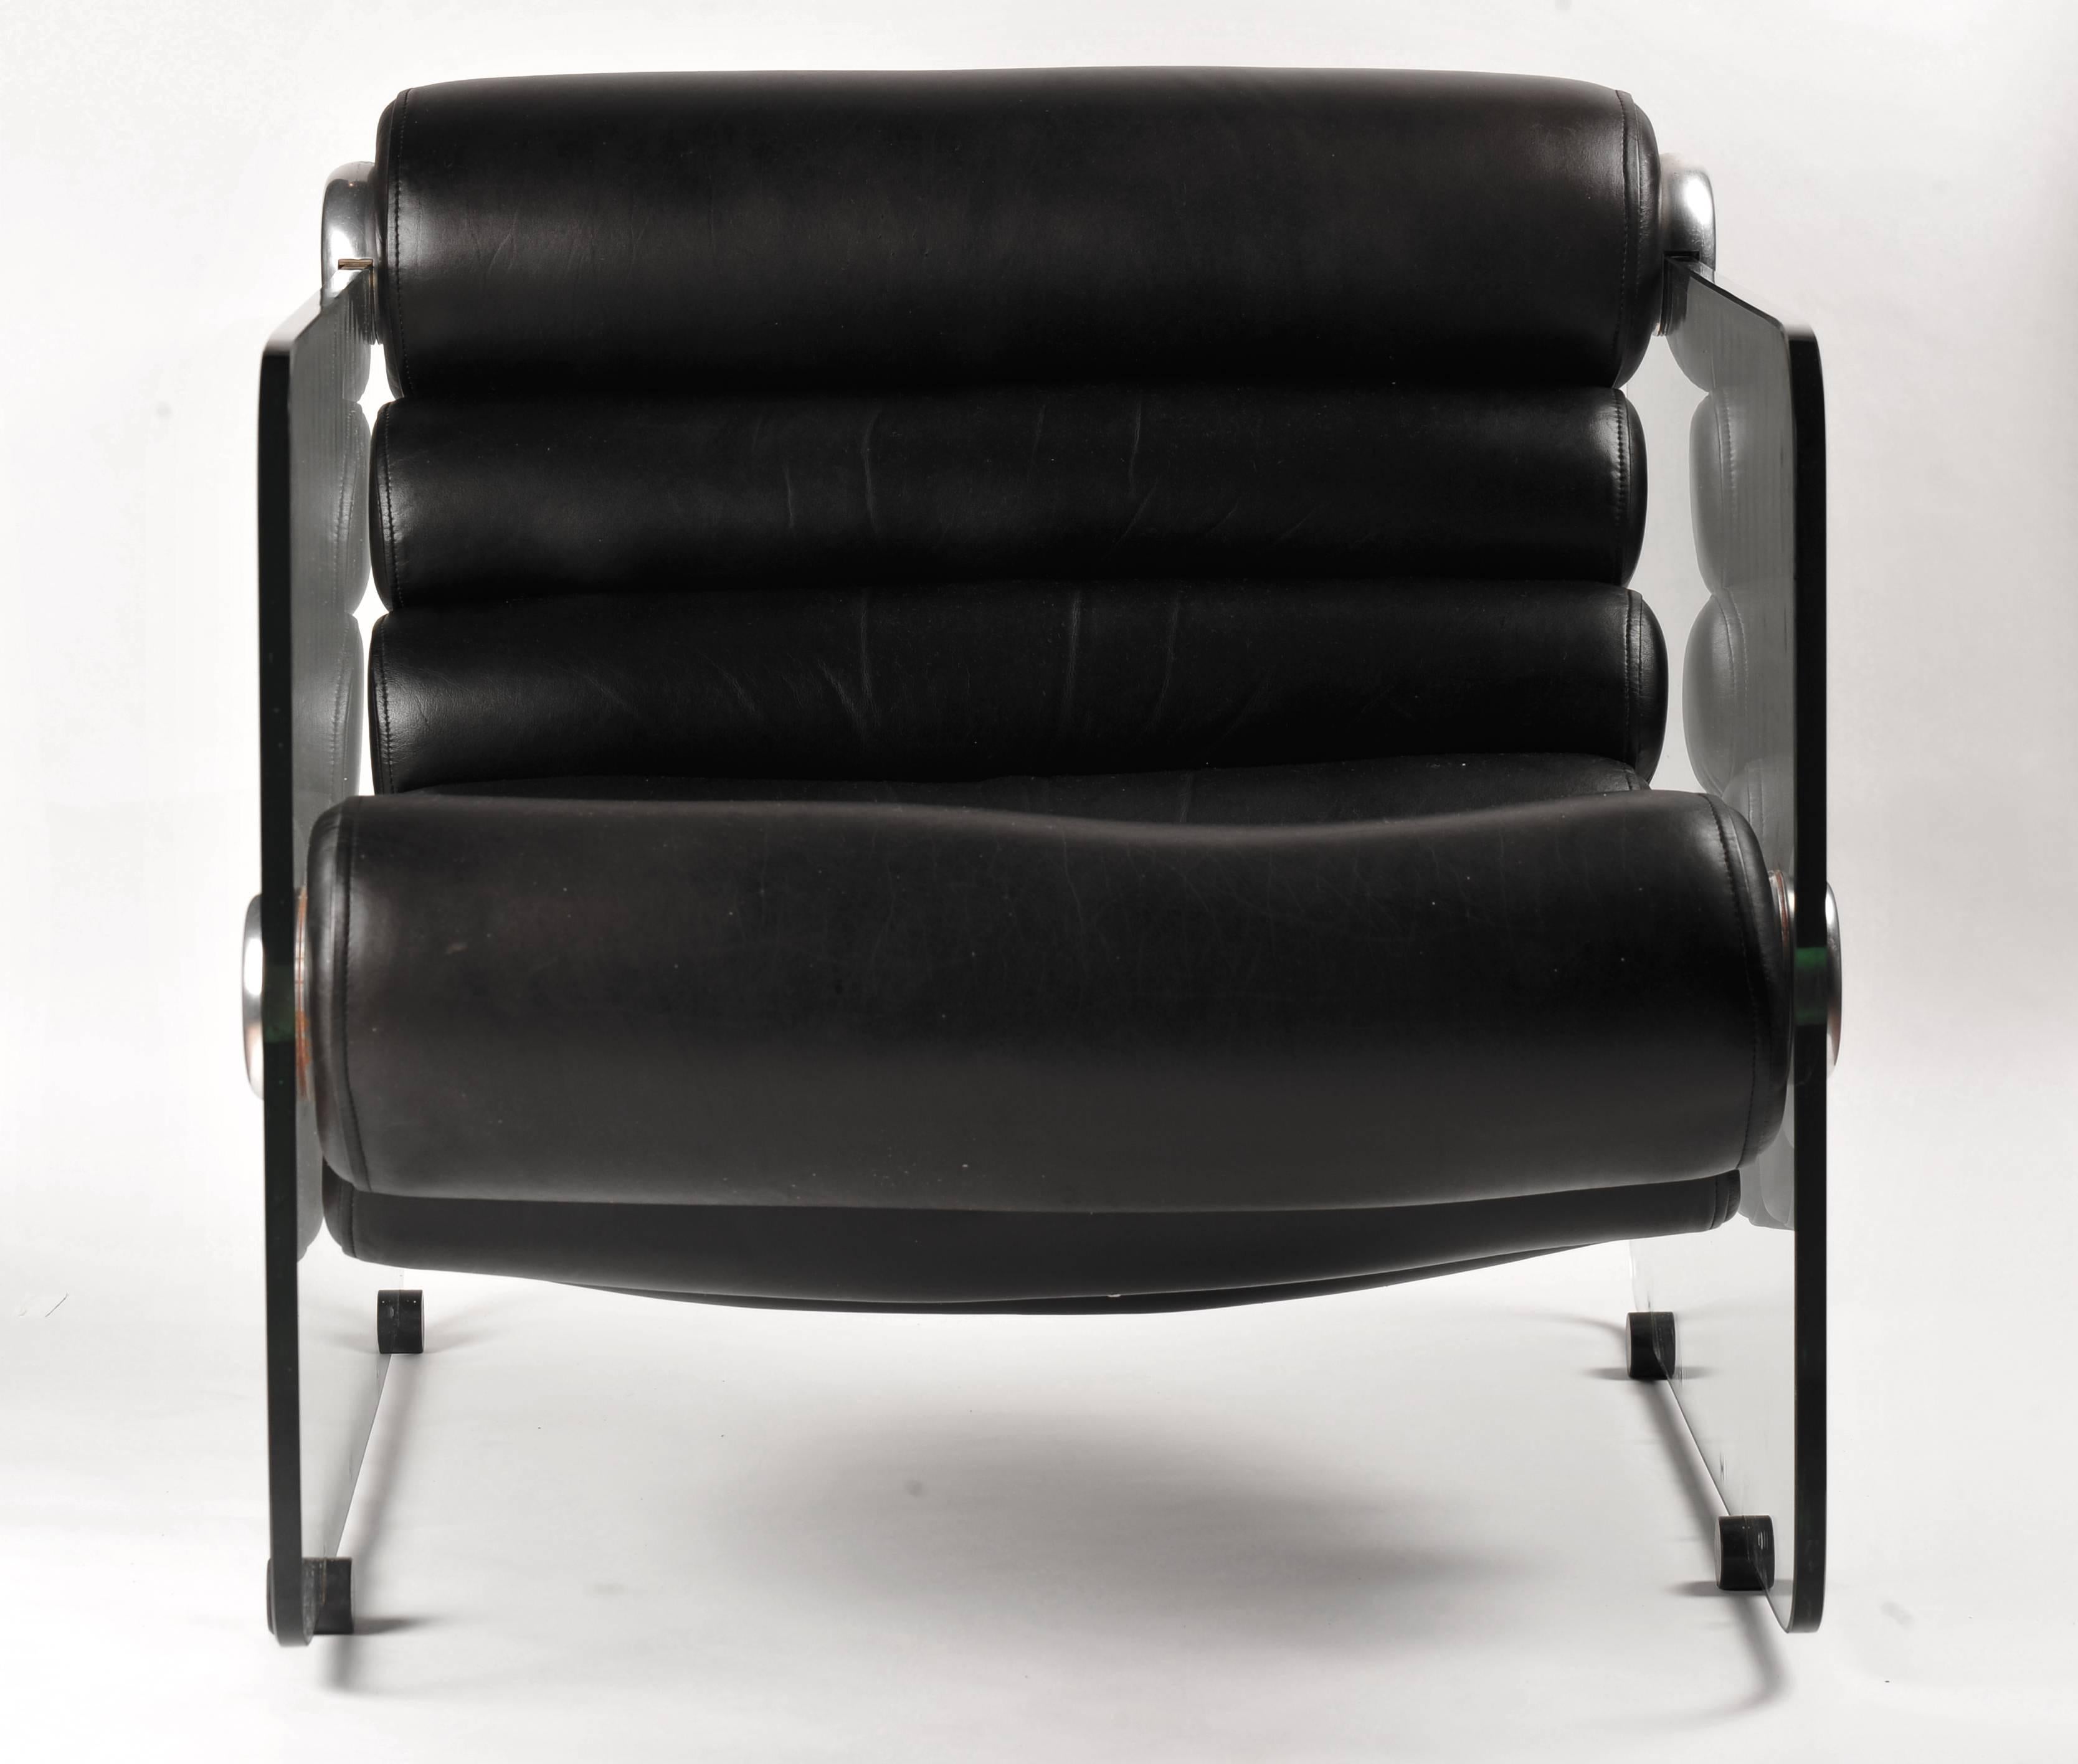 Vintage Italian design by Fabio Lenci. The segmented leather seating area supported by tempered glass creates a sculptural statement piece. Item available for immediate delivery to Austin, San Antonio, Dallas and Houston.